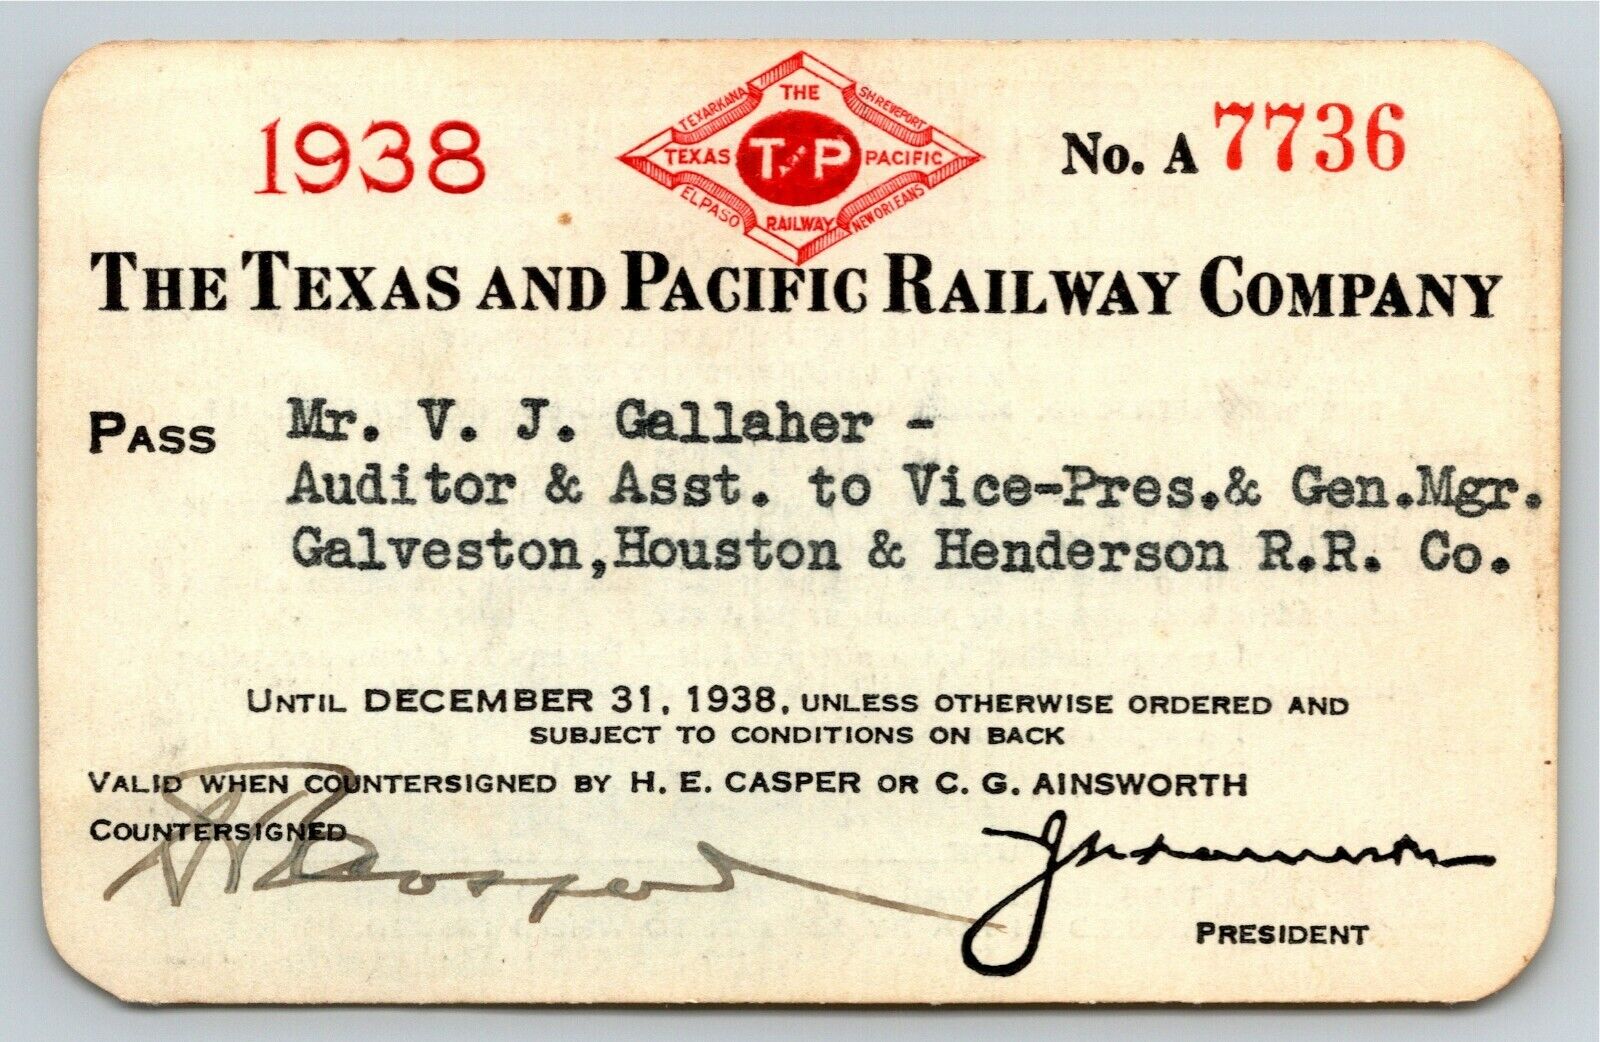 Vintage Railroad Annual Pass The Texas & Pacific Railway 1938 A7736 Thermography